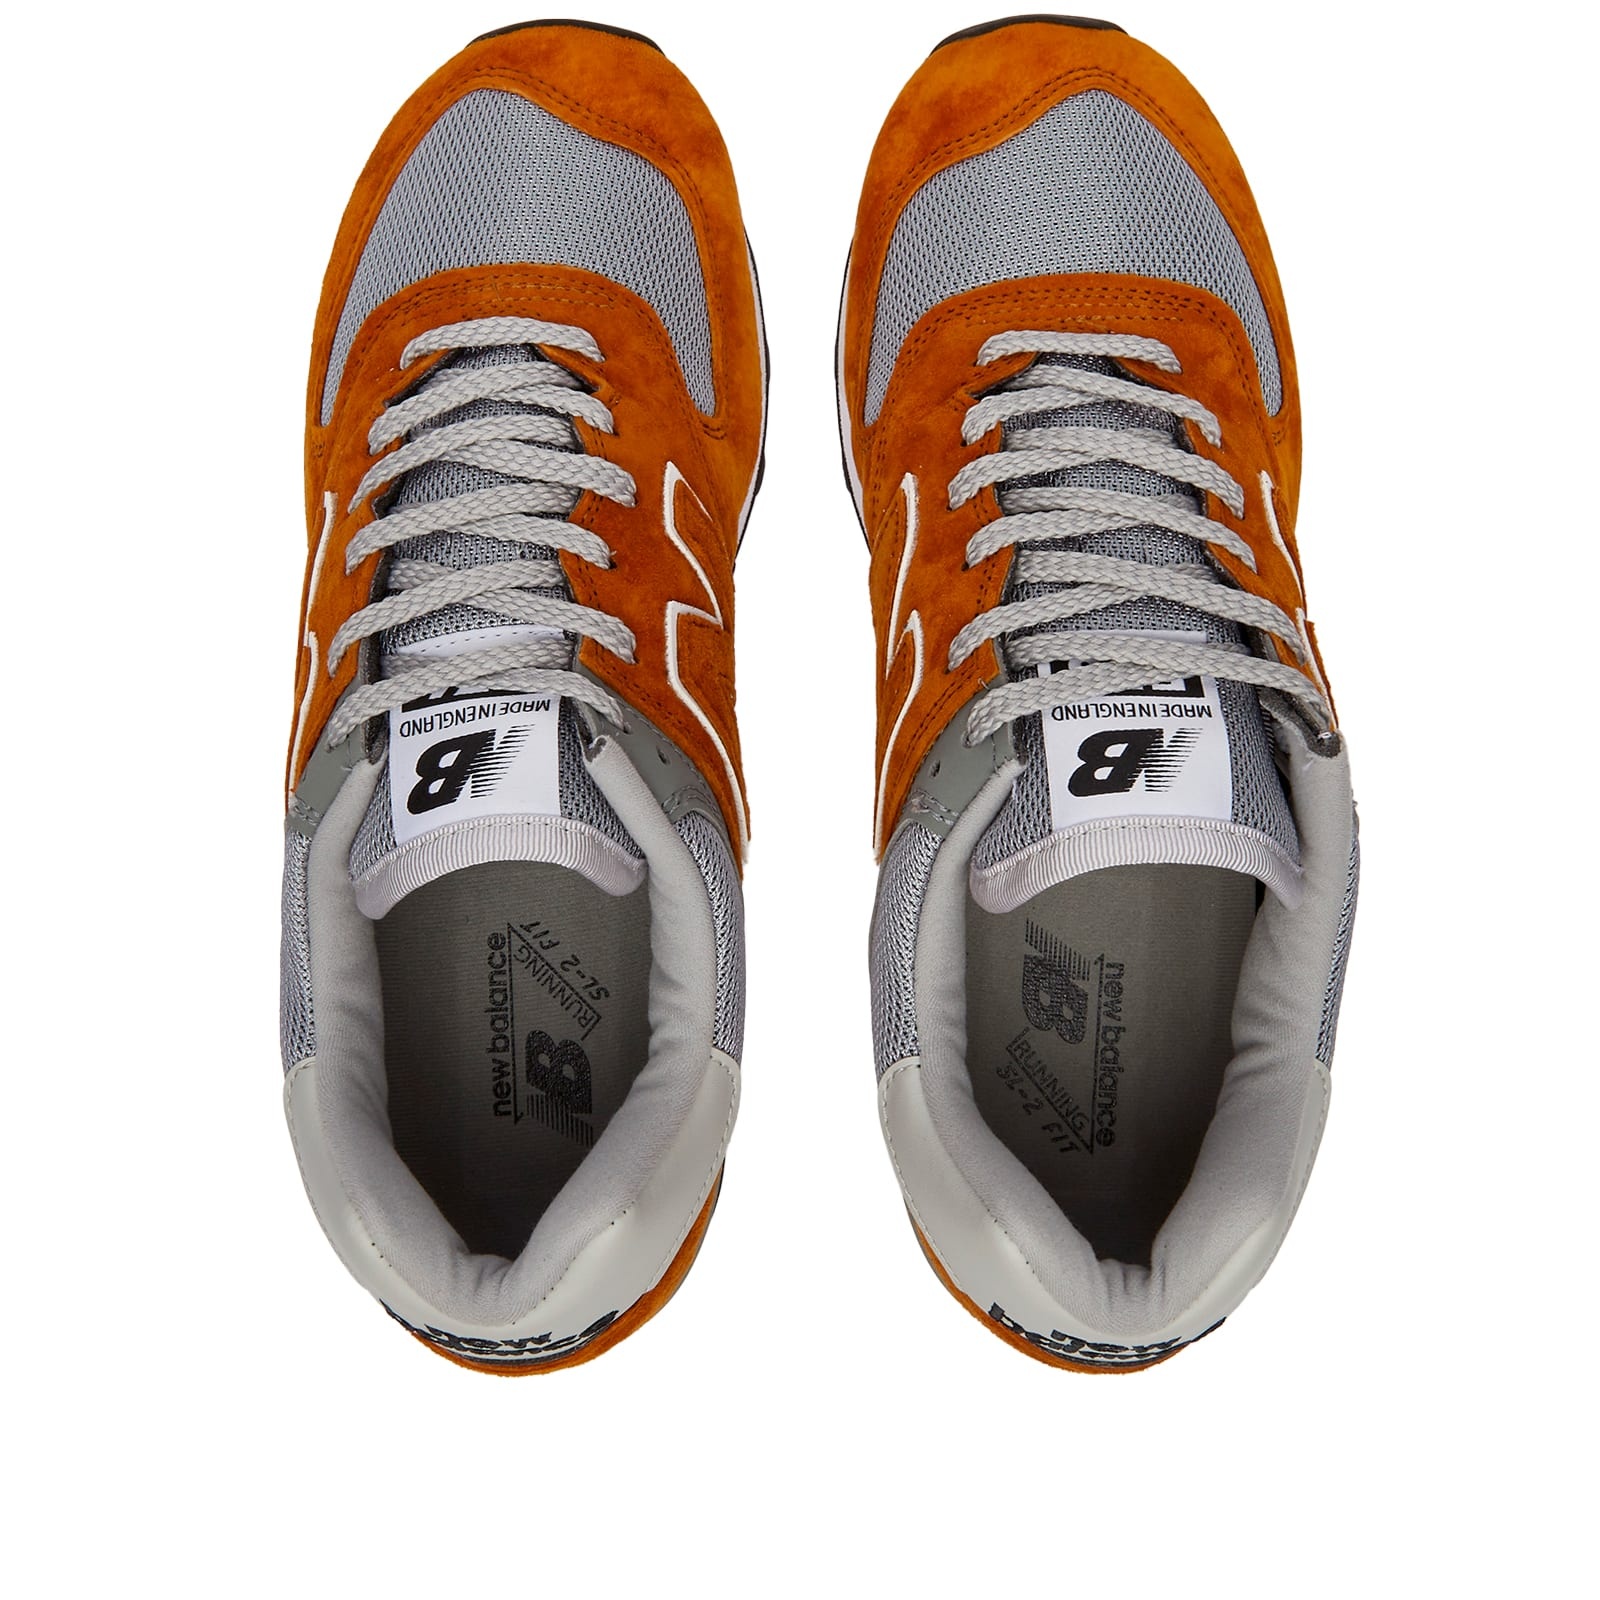 New Balance OU576OOK - Made in UK - 5